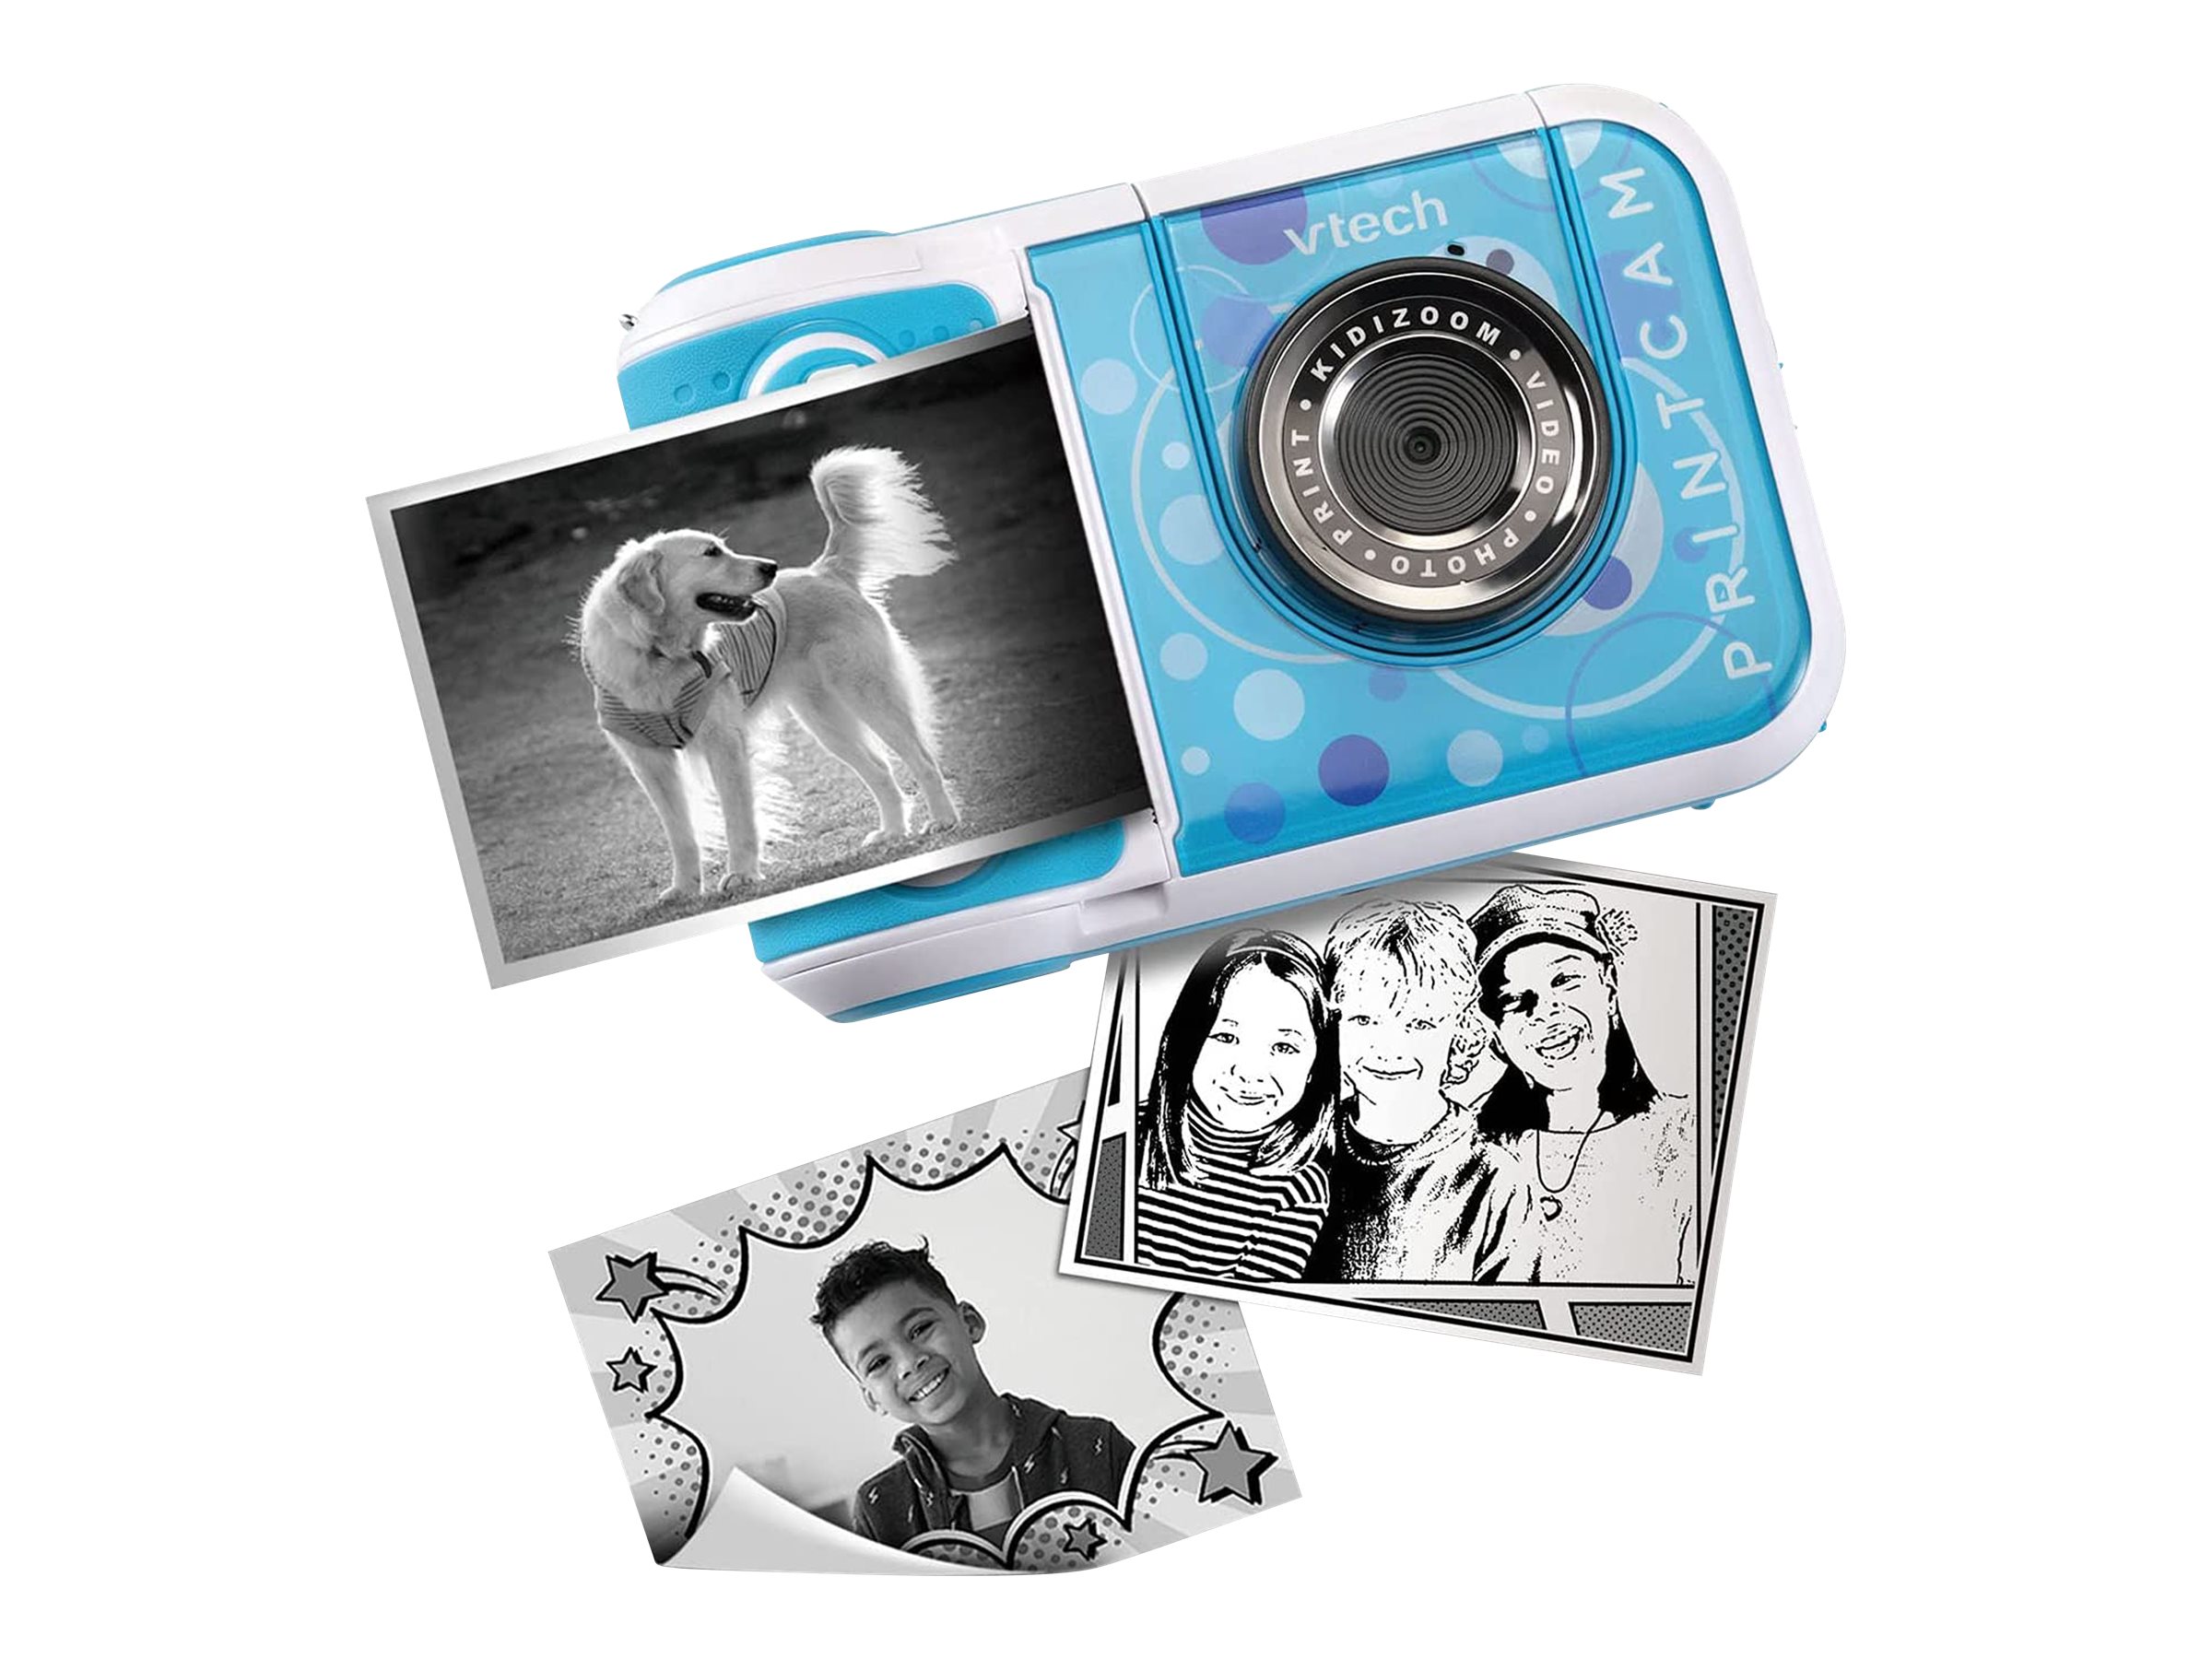 NEW* KidiZoom Print Cam from VTech Review! 